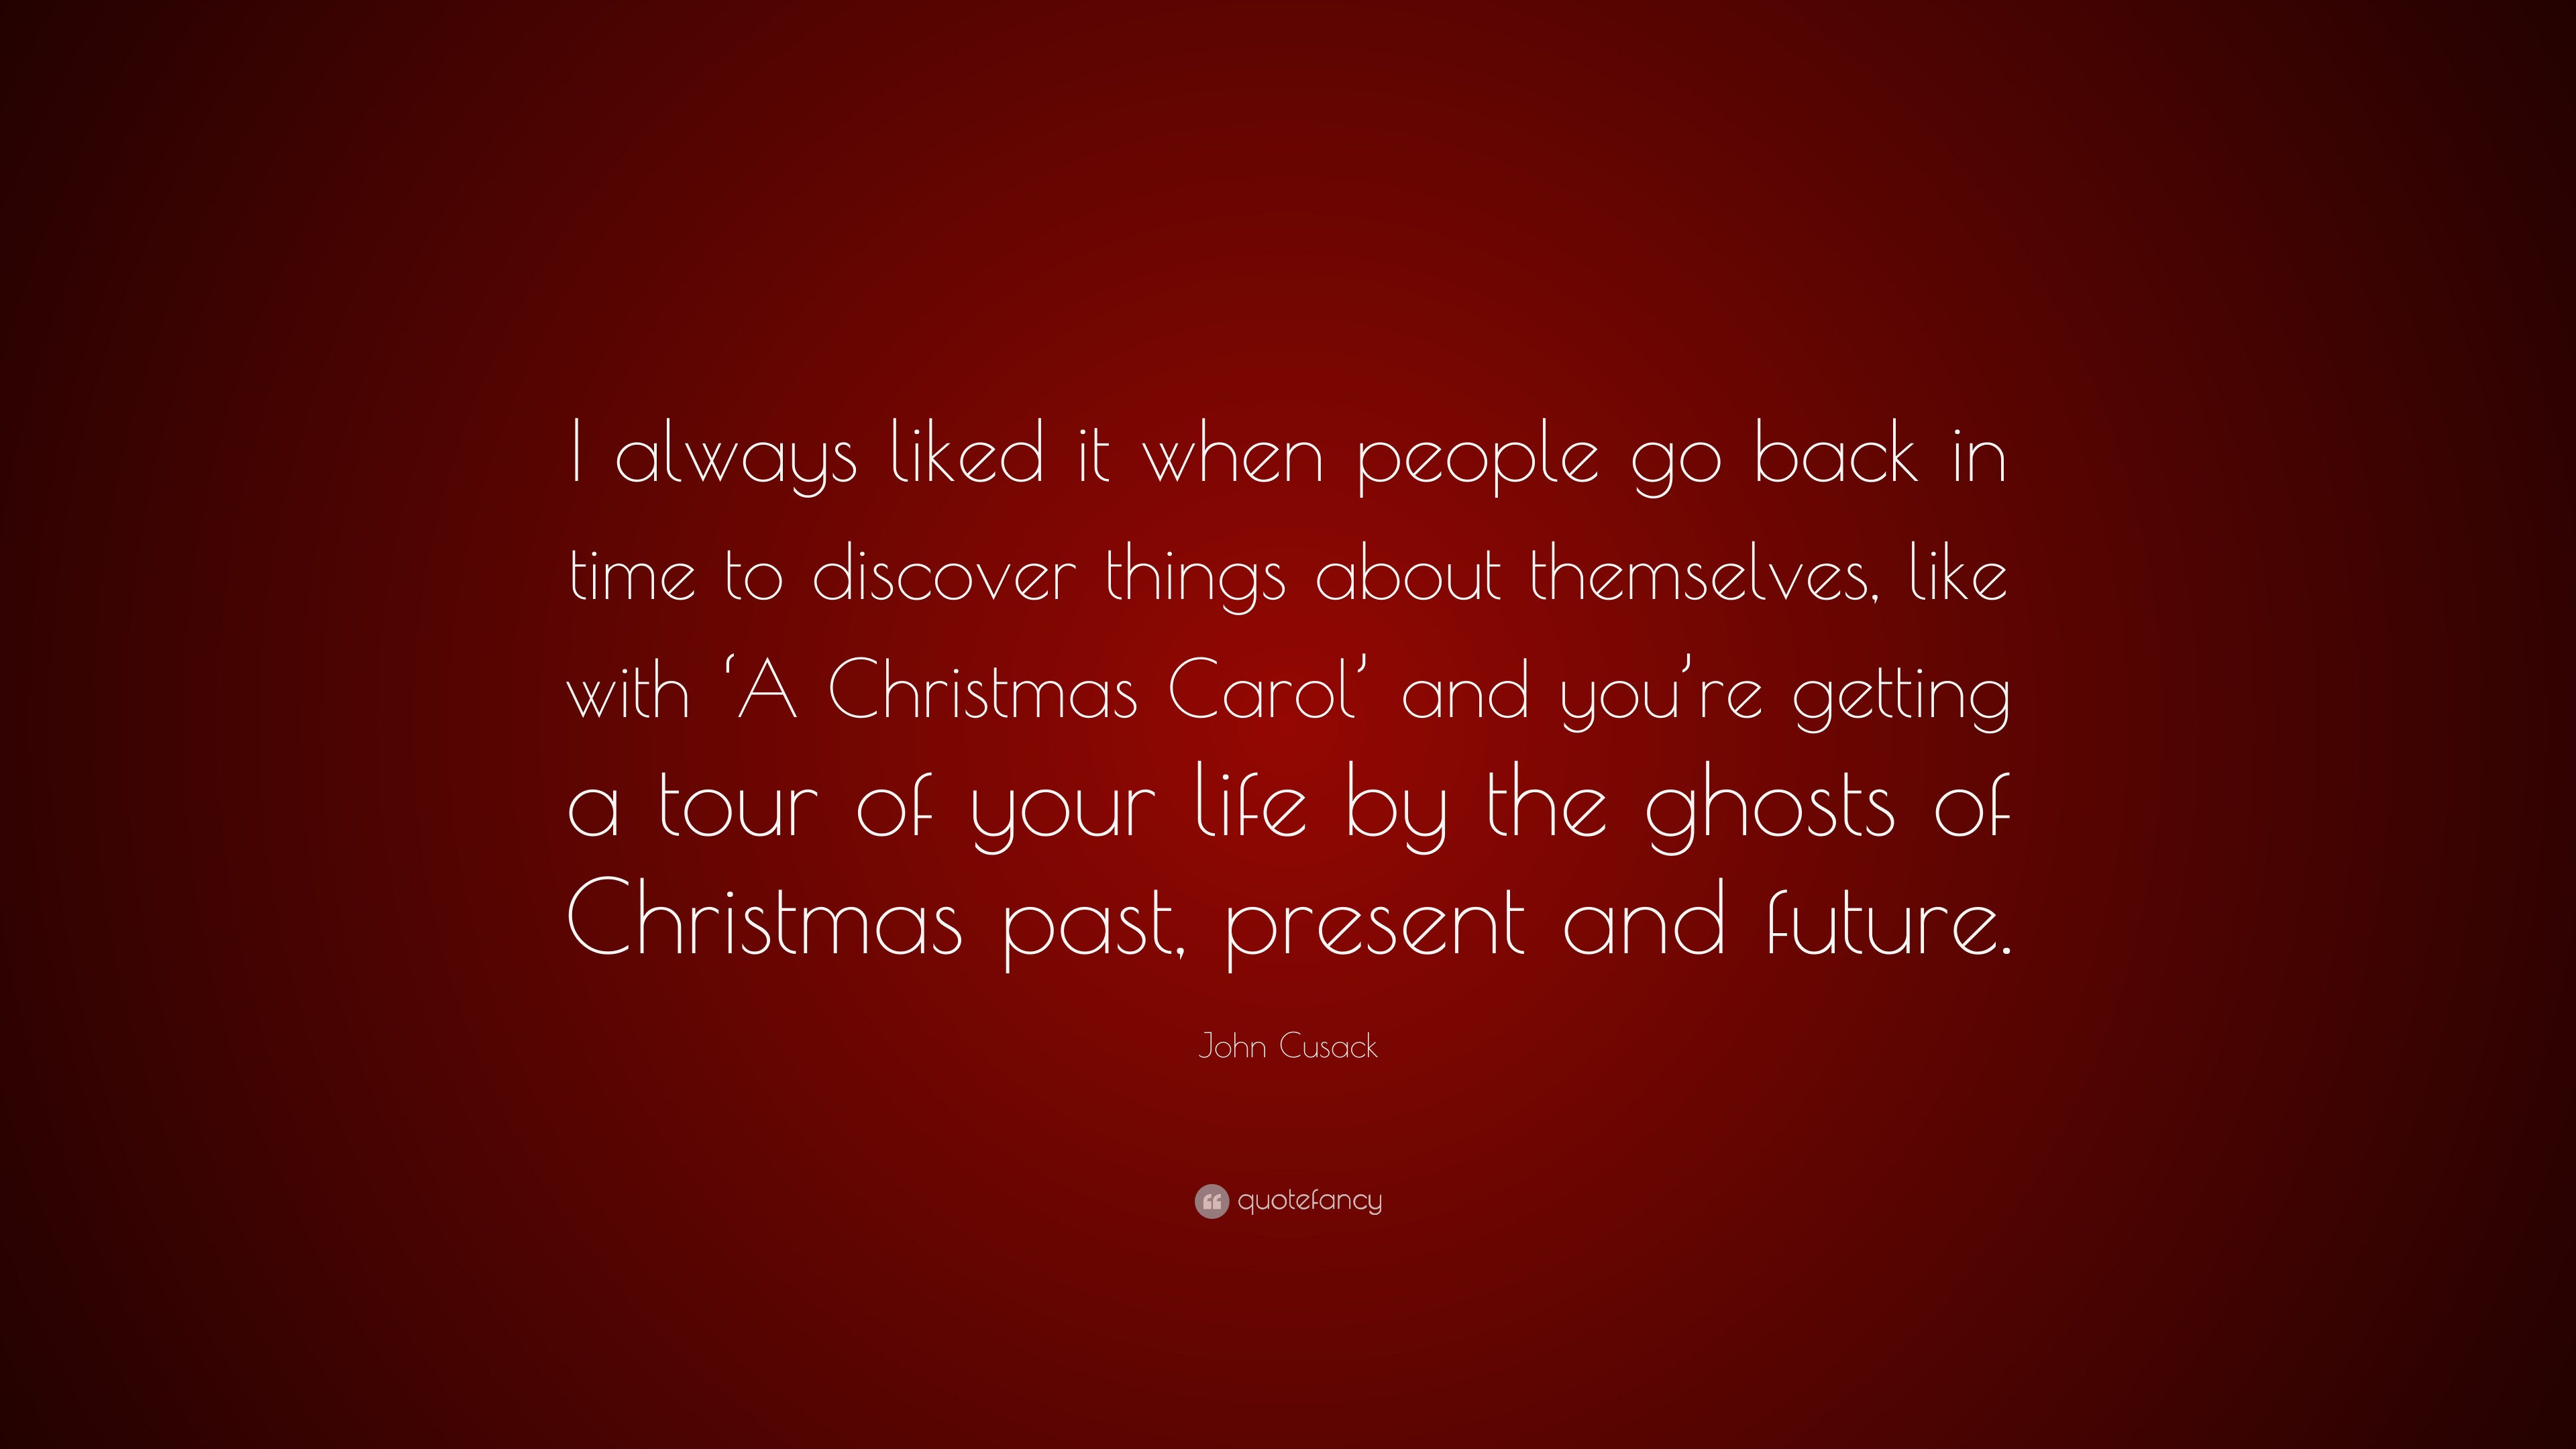 Ghost Of Christmas Past Quotes
 John Cusack Quote “I always liked it when people go back